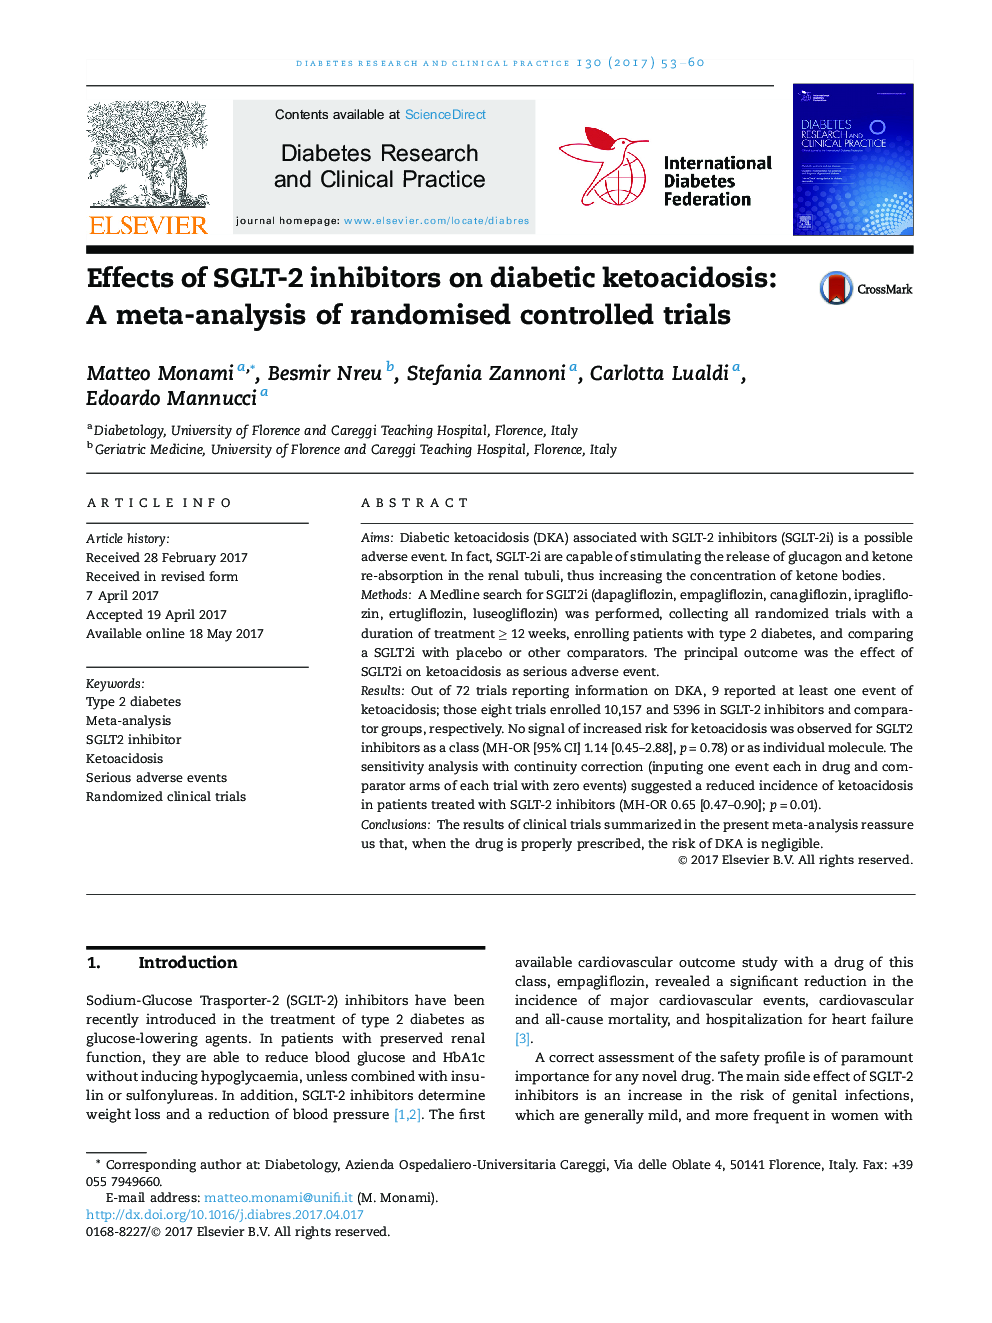 Effects of SGLT-2 inhibitors on diabetic ketoacidosis: A meta-analysis of randomised controlled trials